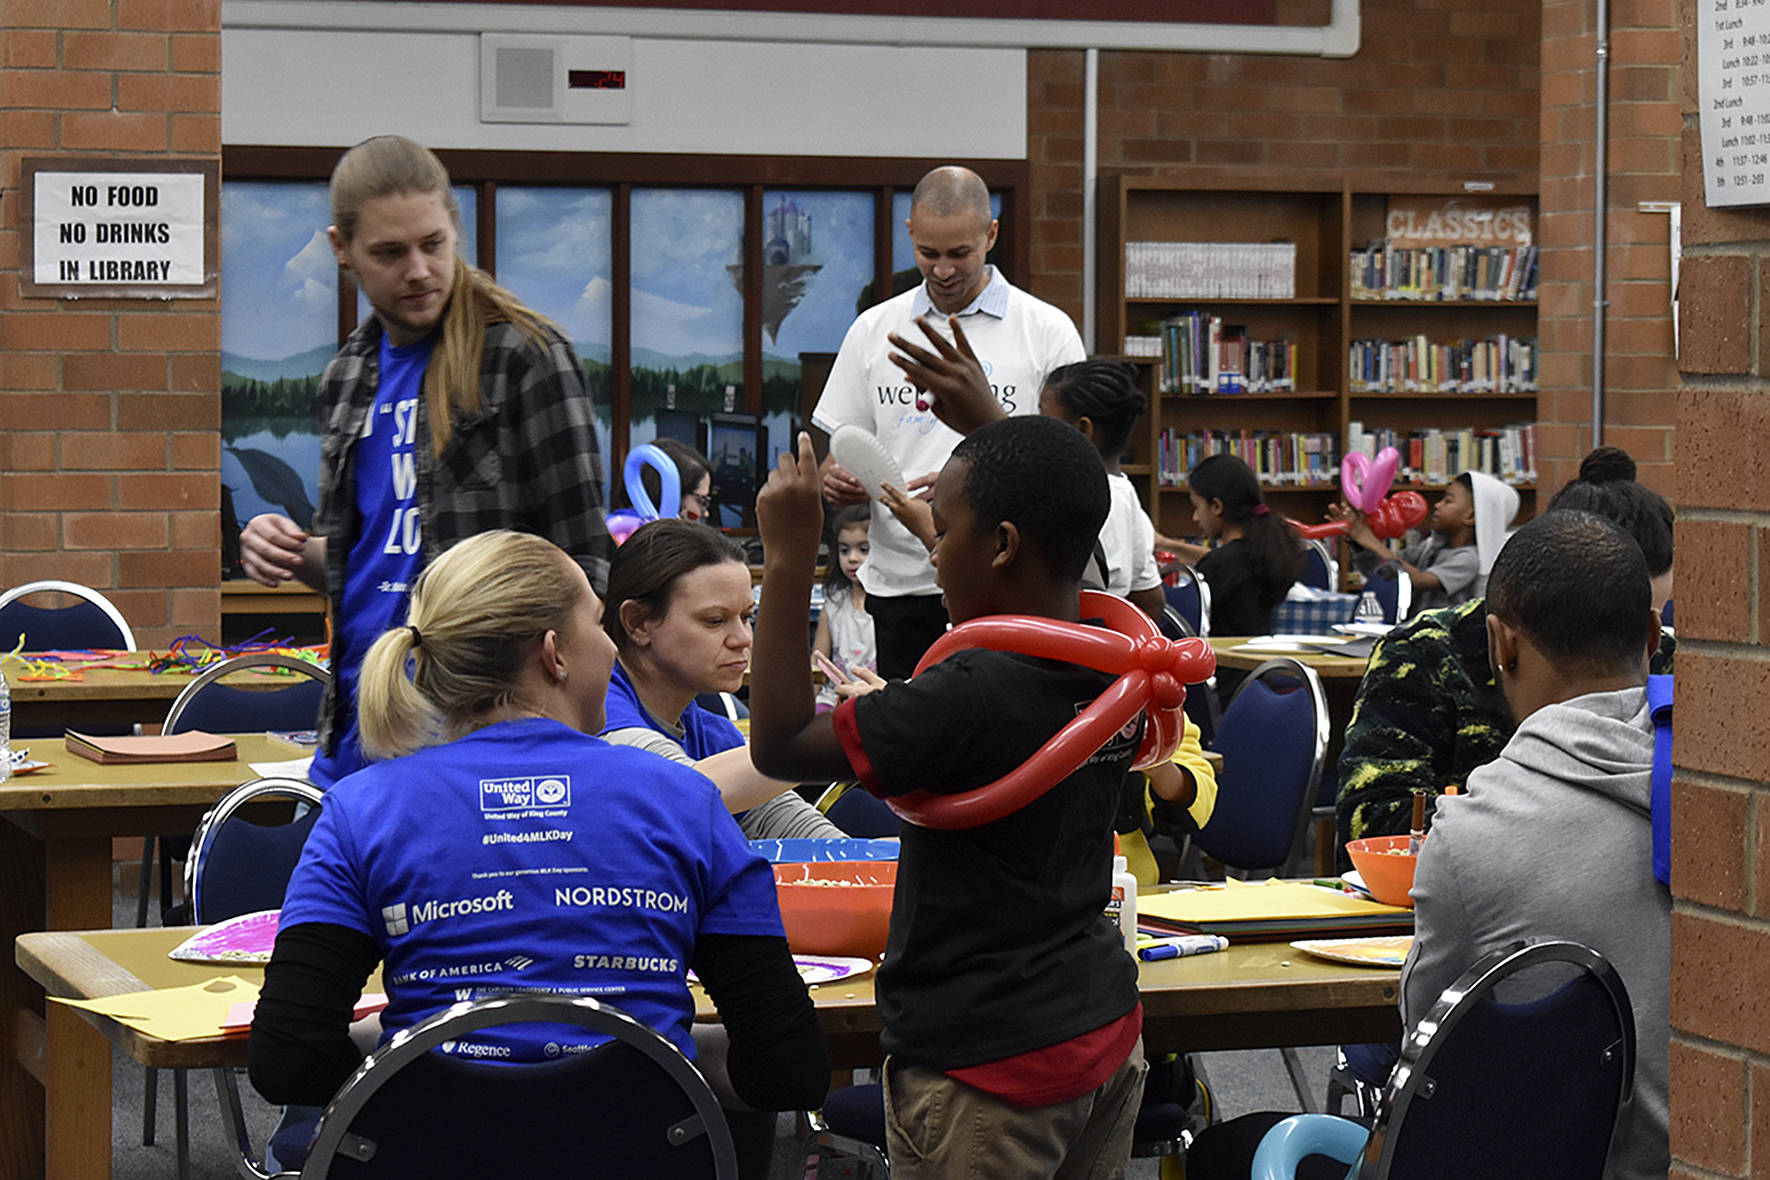 Photo by Haley Ausbun. In the Lindbergh High School library, United Way volunteers watched kids and small children while their parents talked to housing assistance providers at the Family Resource Exchange event on Martin Luther King Jr. Day, Jan. 20.